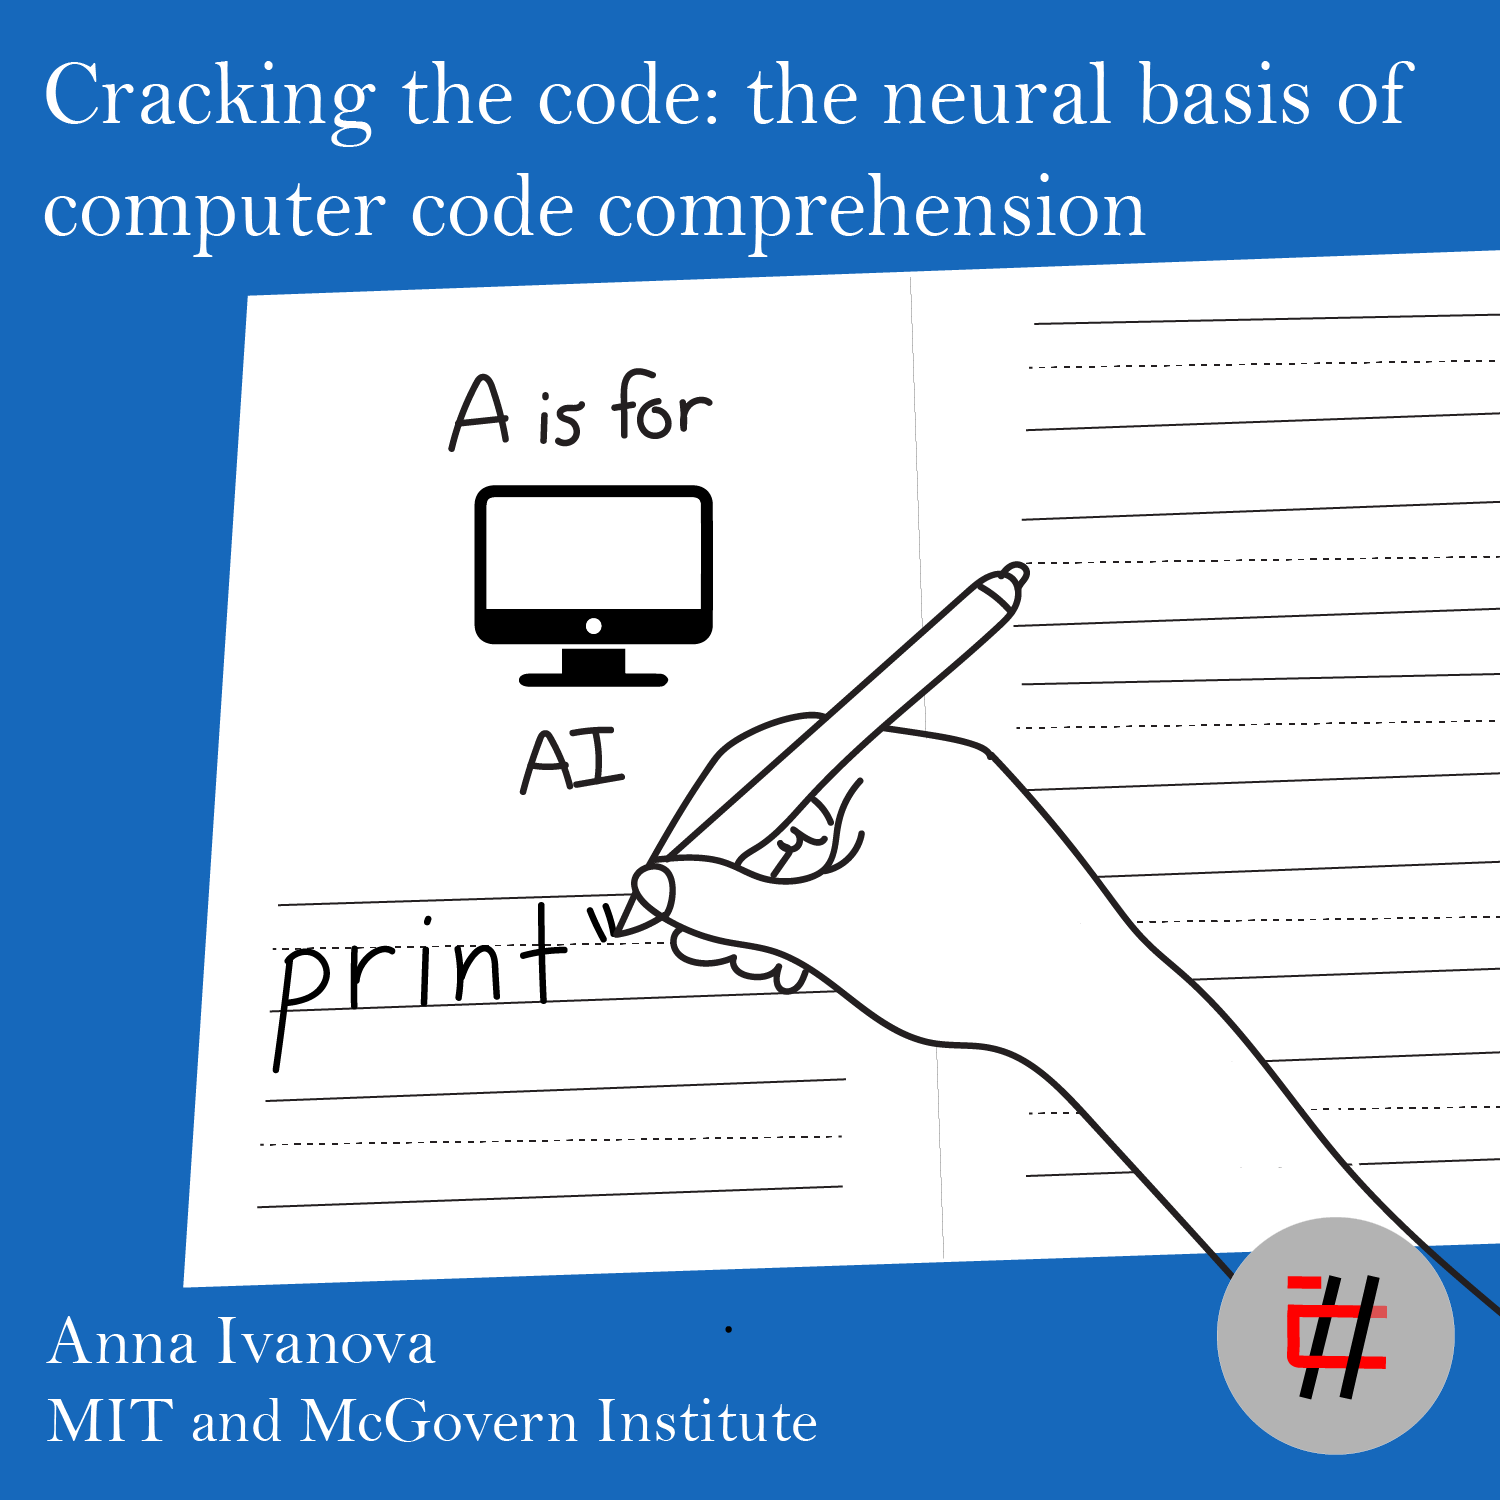 Cracking the code: the neural basis of computer code comprehension